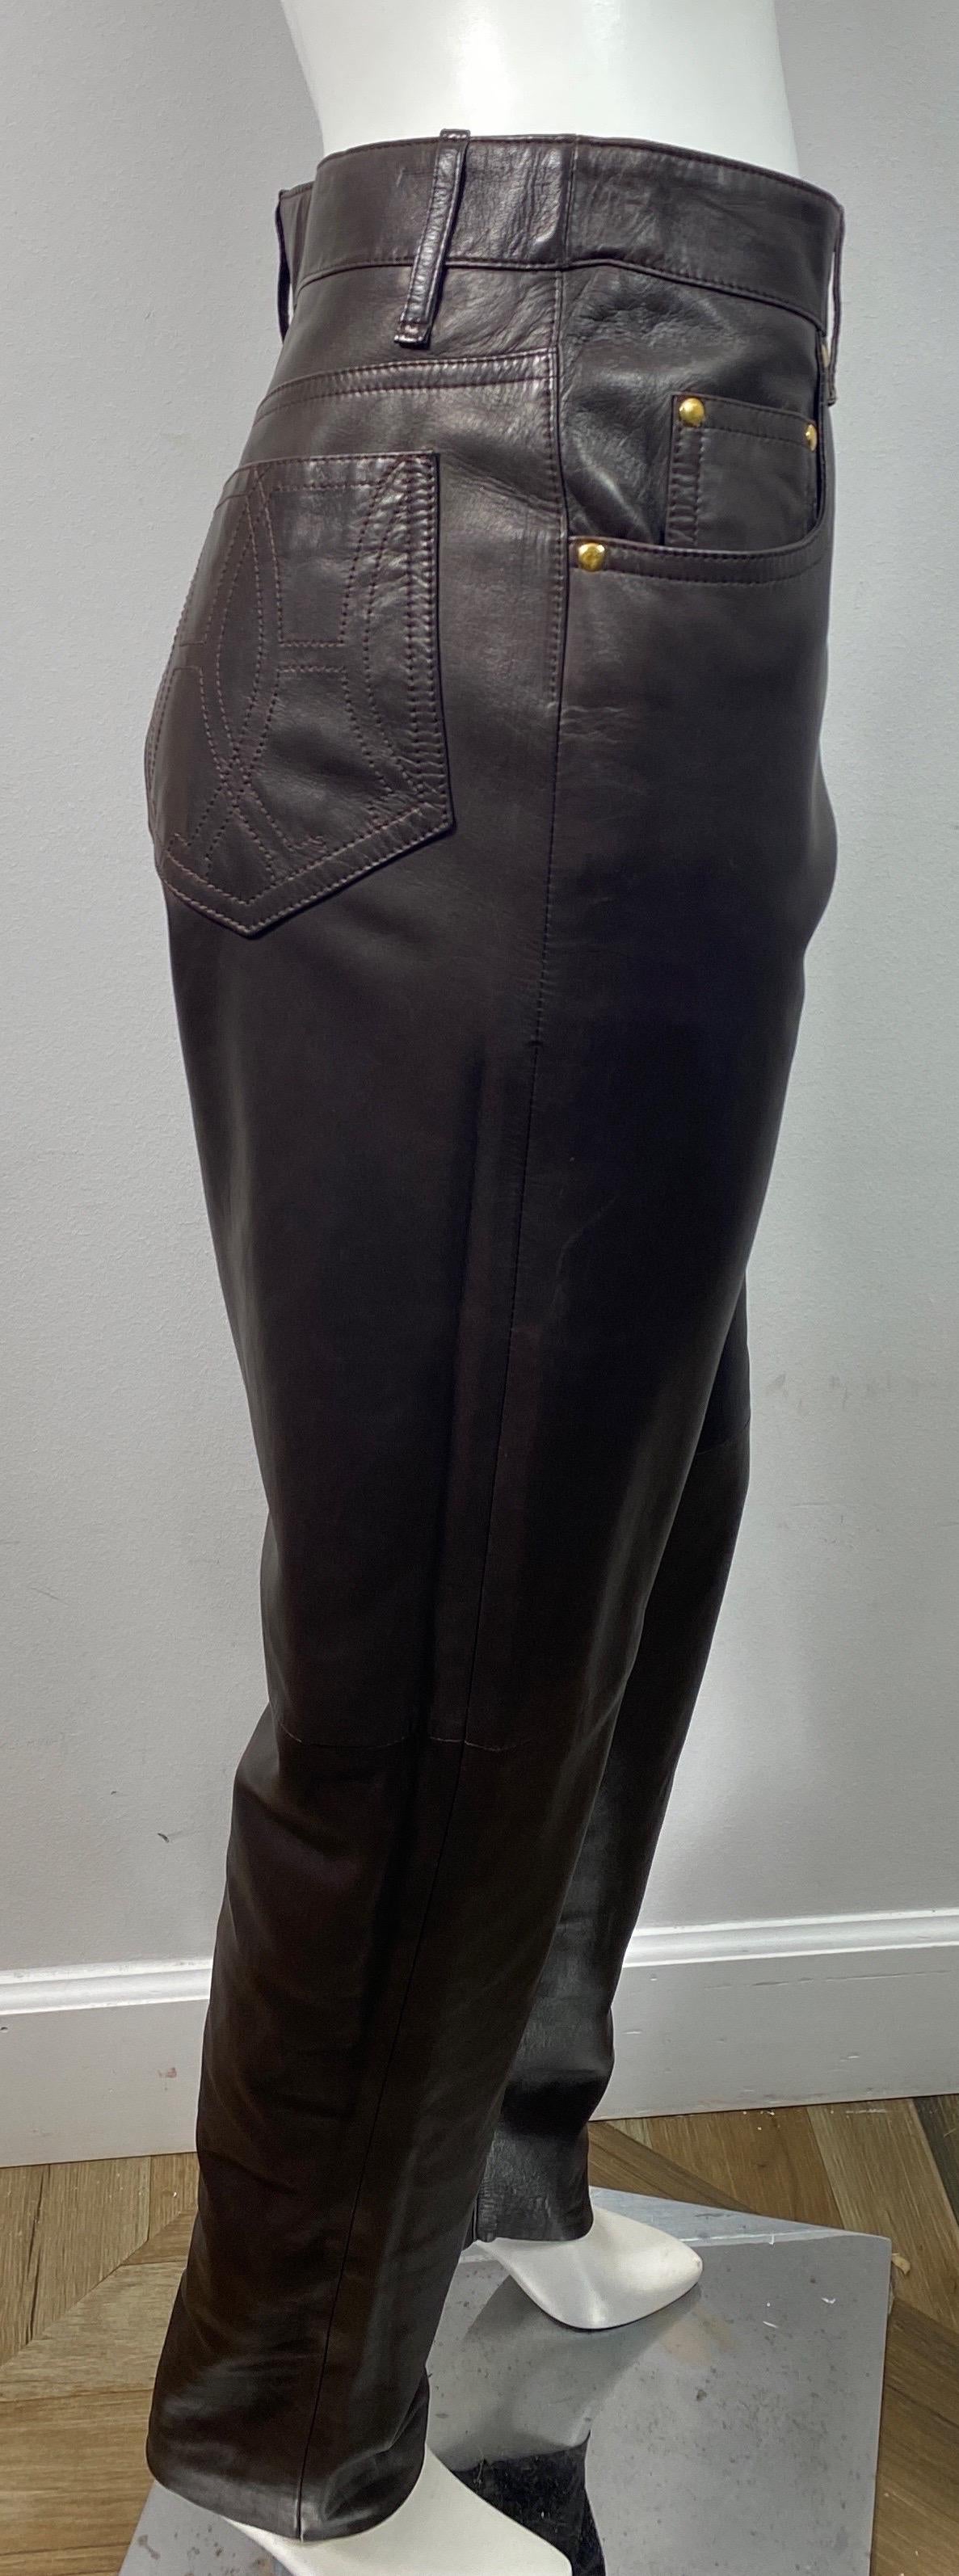 Hermes 1990’s Vintage Chocolate Brown Jean Style Leather Pants - Size 42 For Sale 4